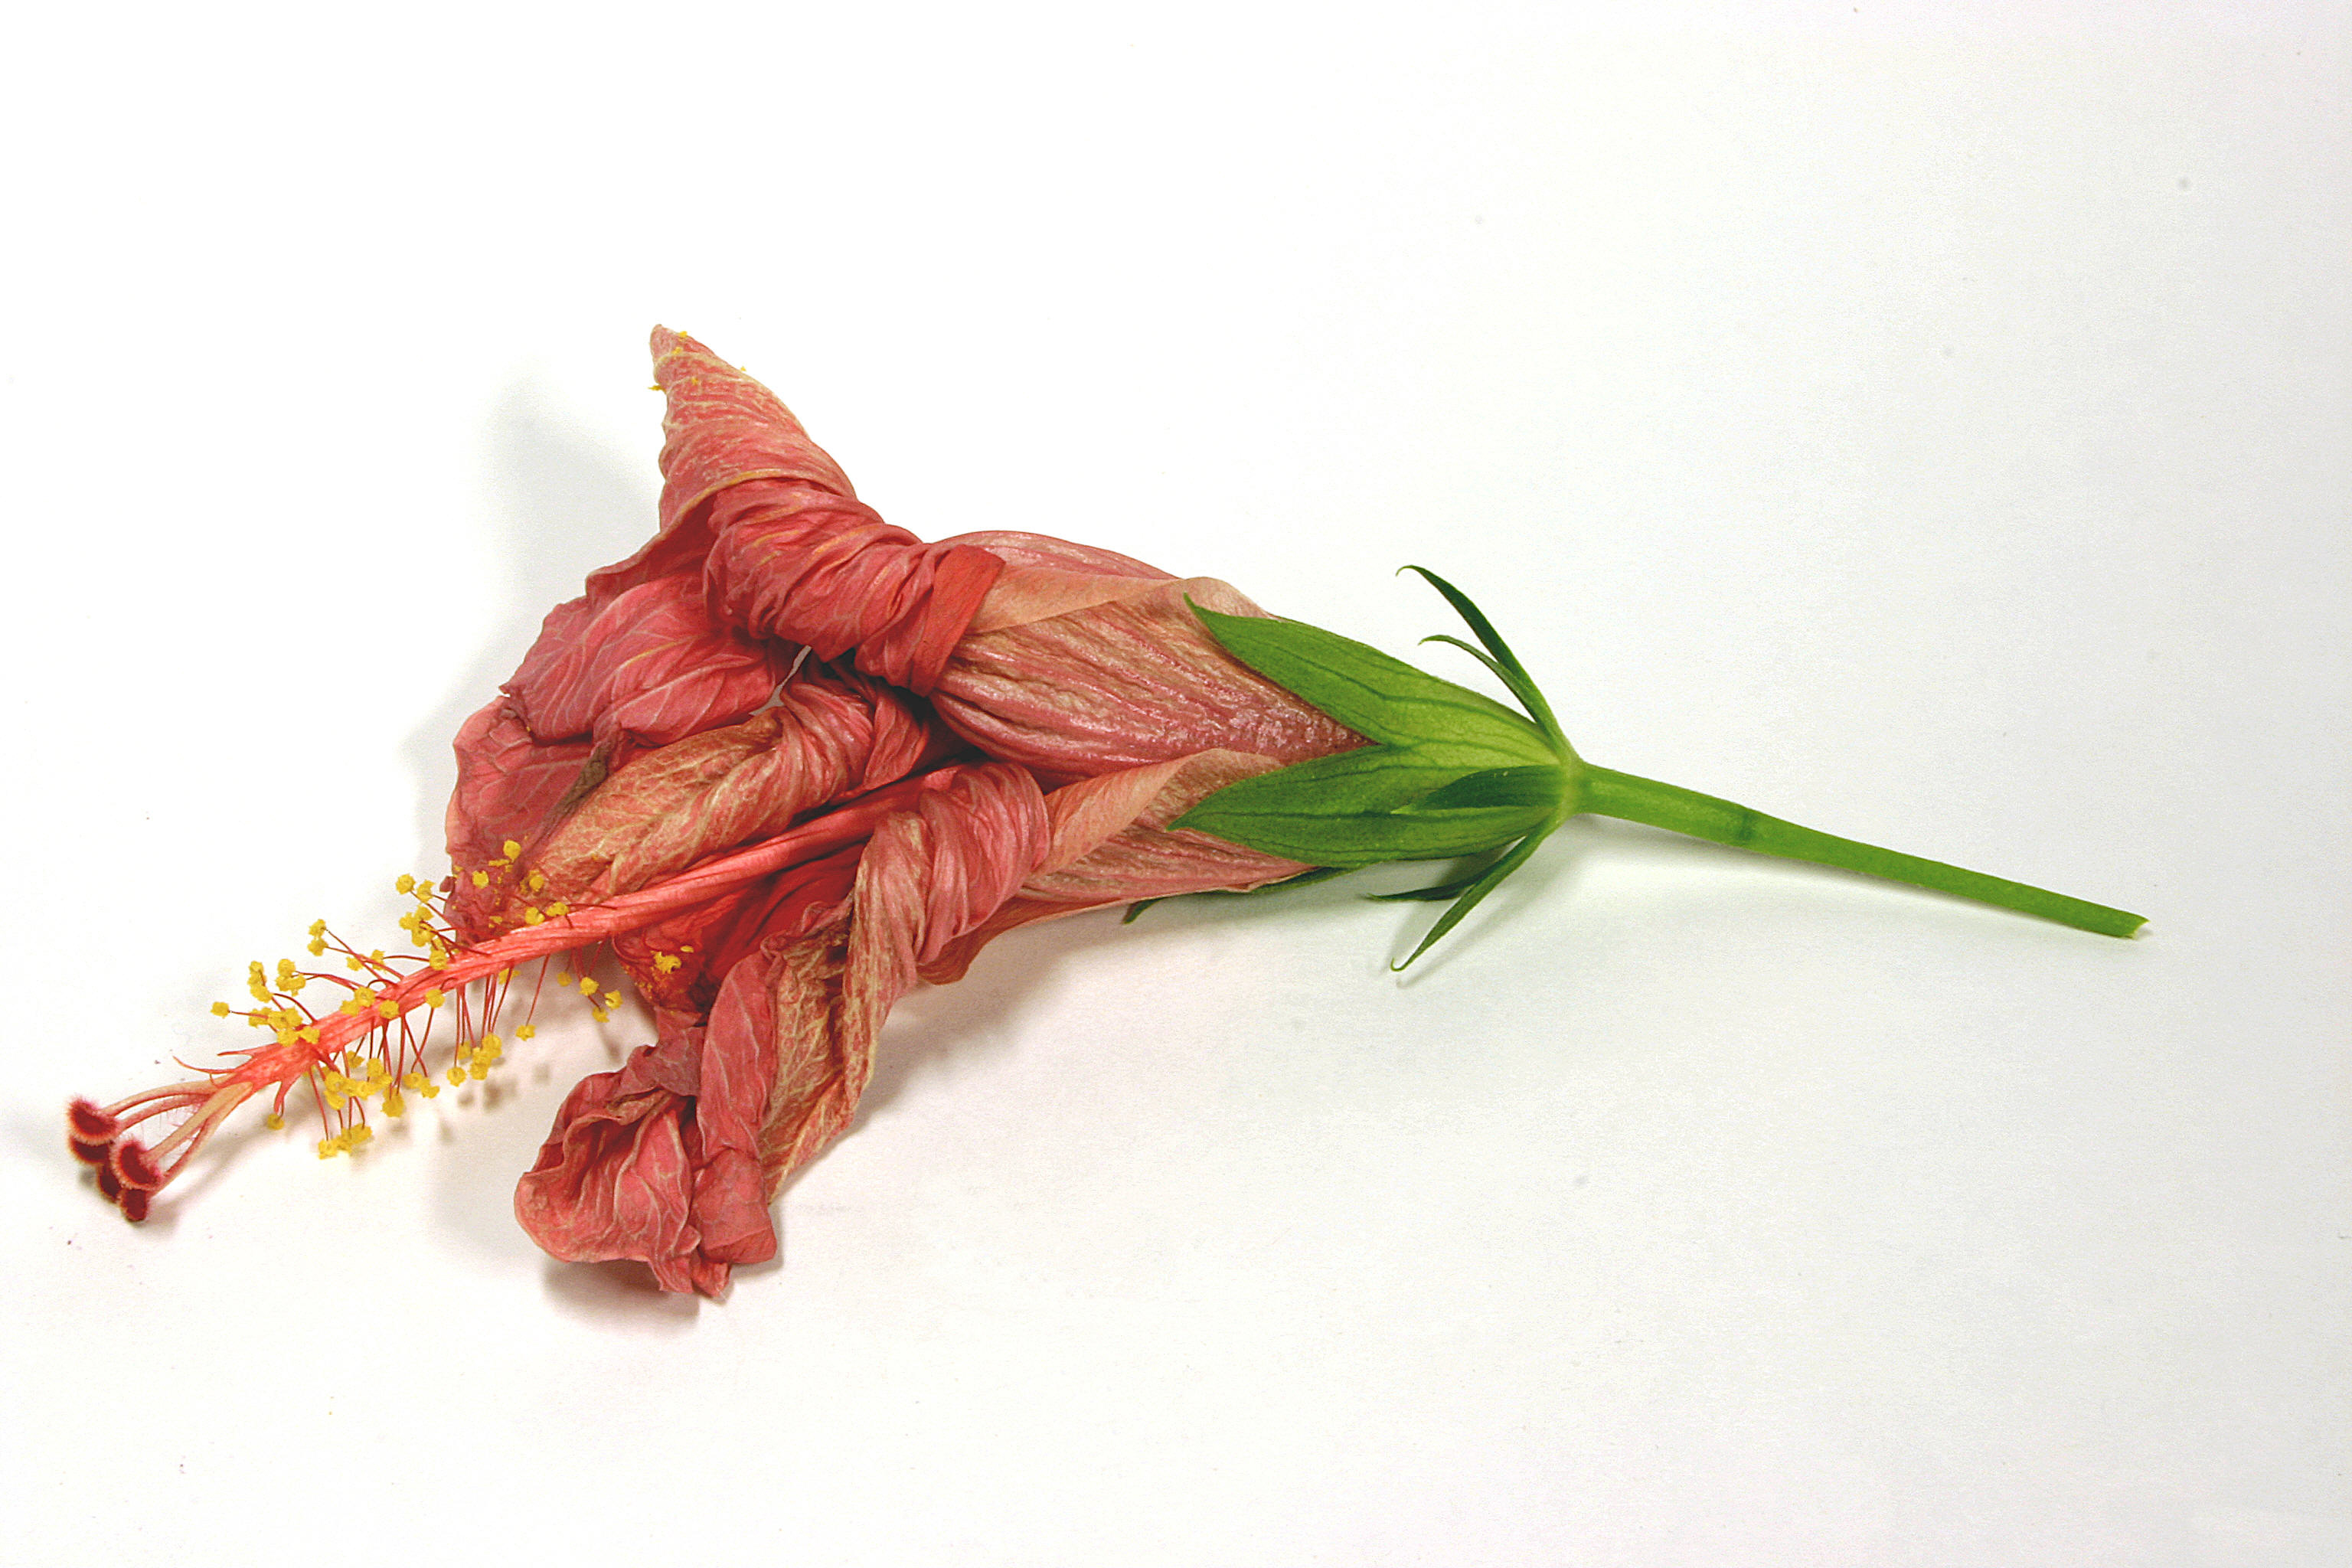 File:Withered Hibiscus Blossom.jpg - Wikimedia Commons